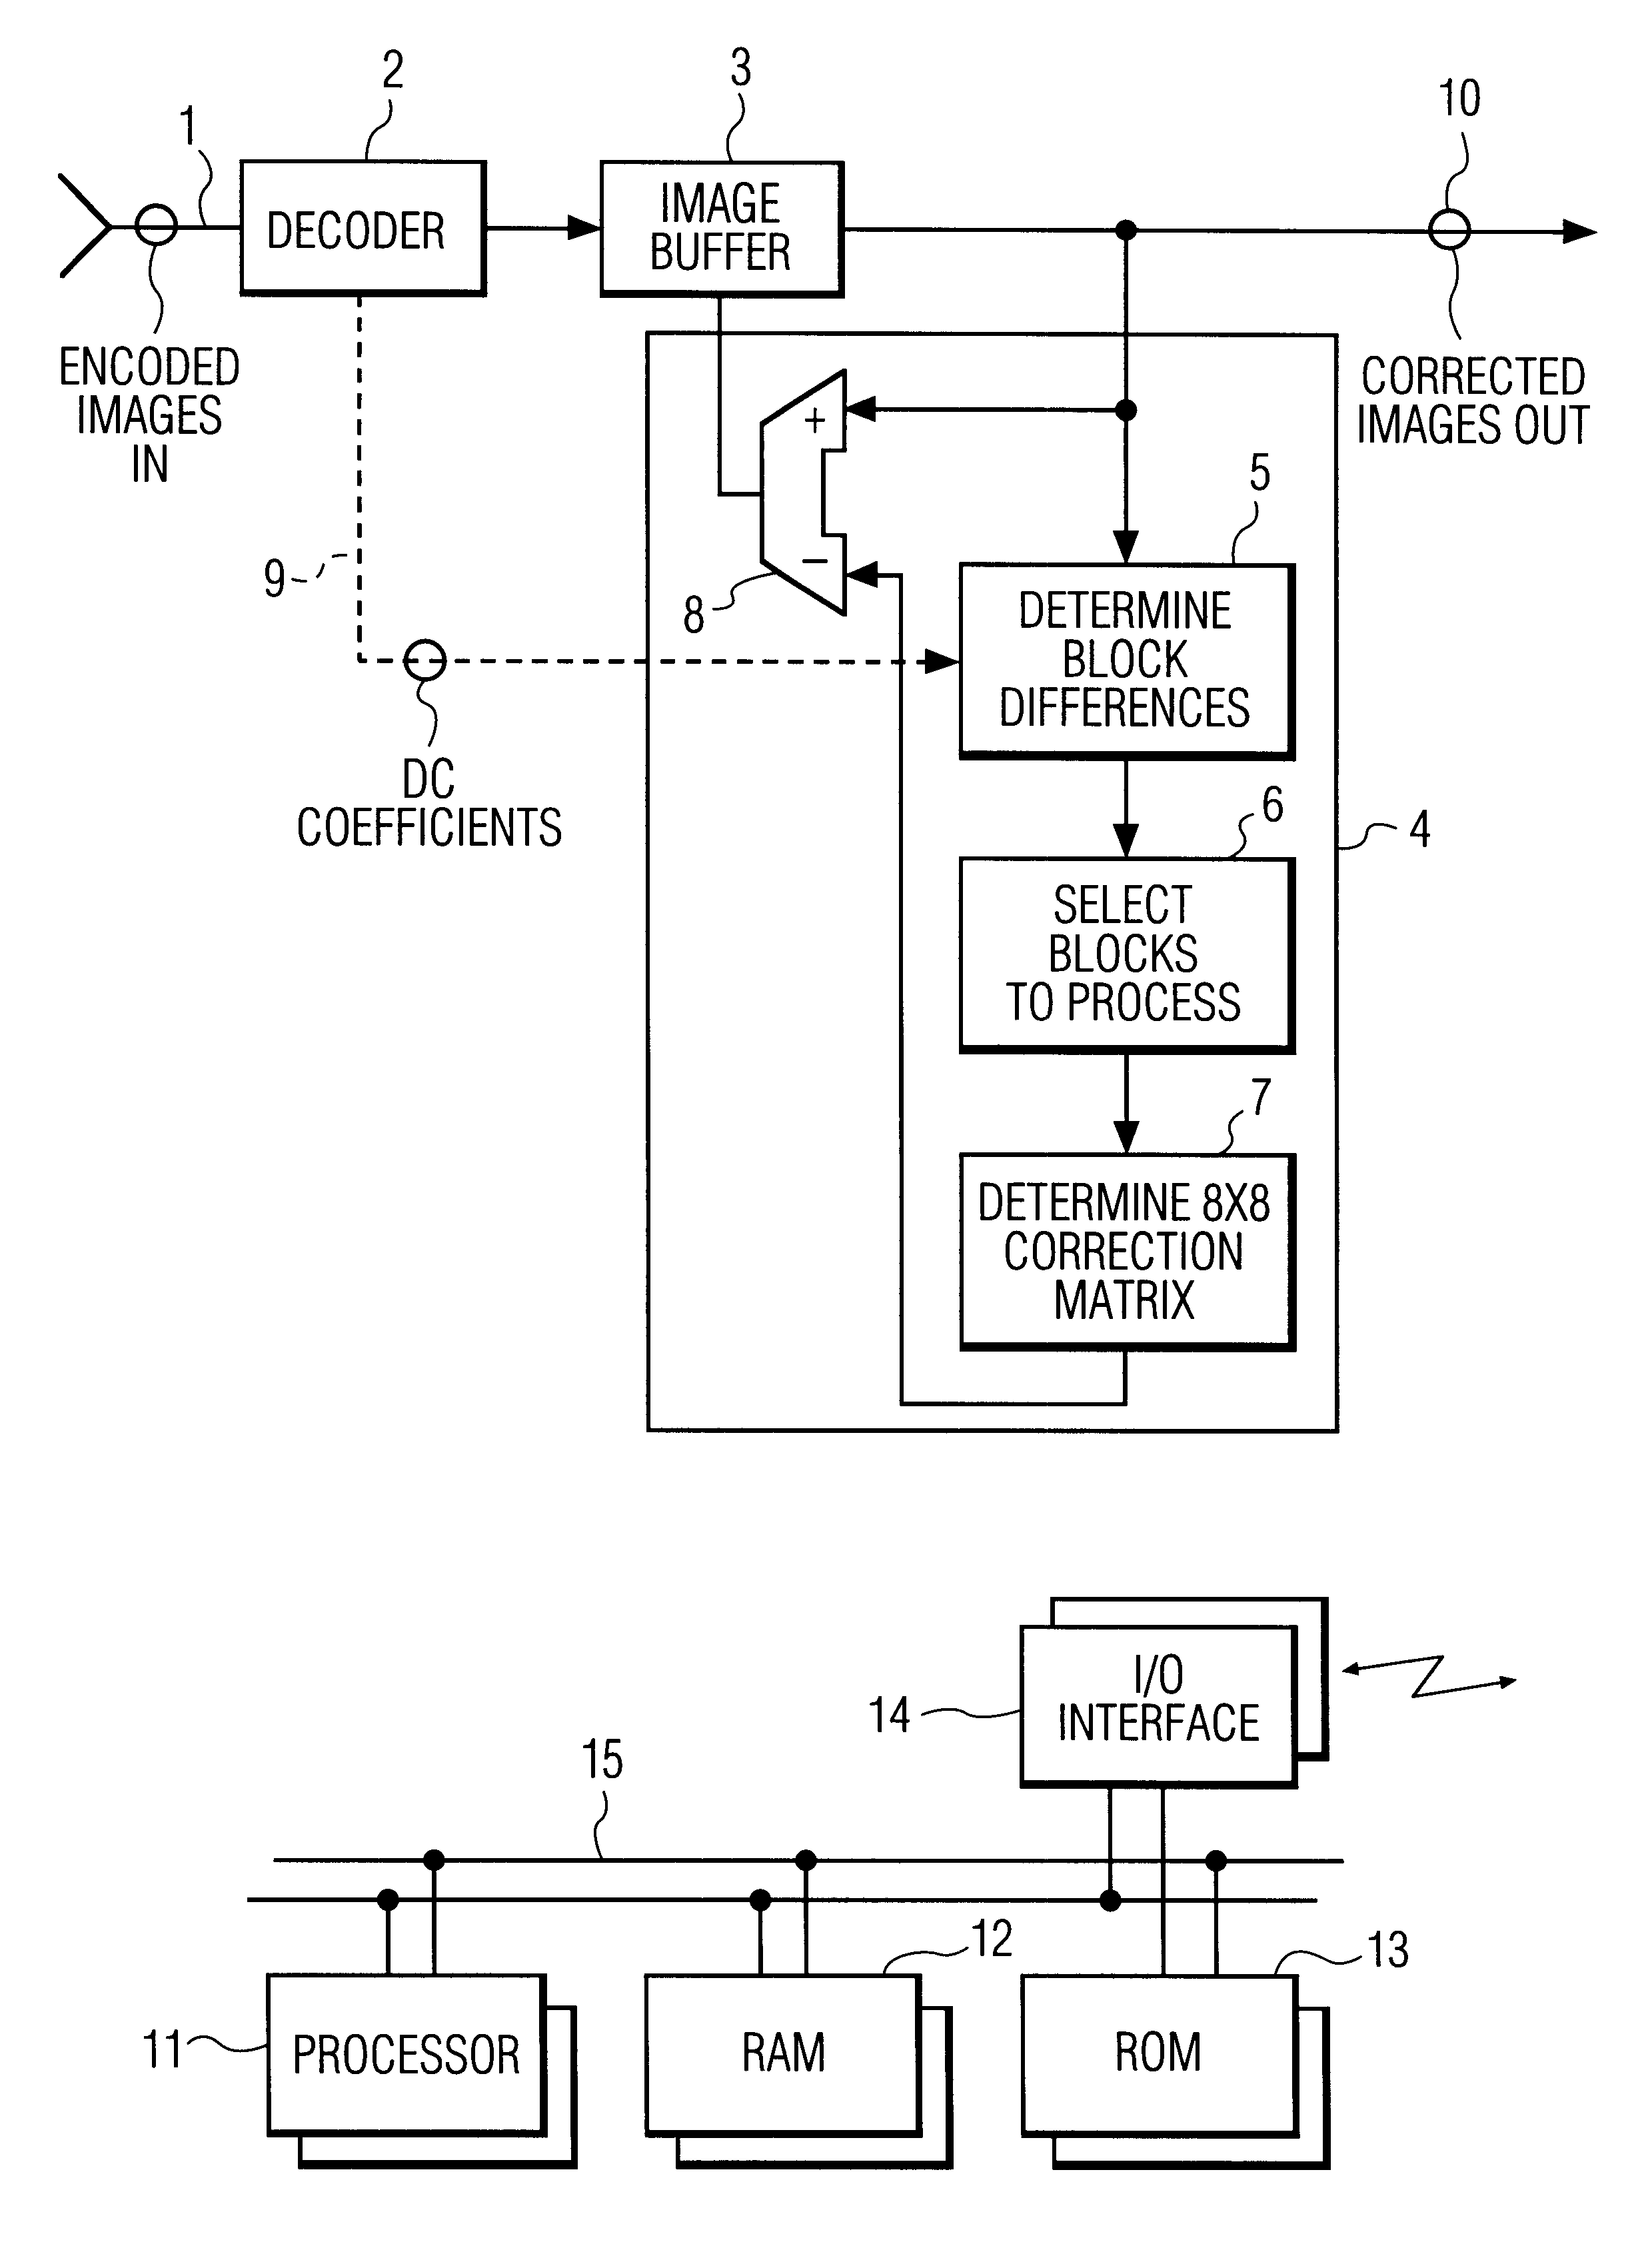 Systems and methods for post-processing decompressed images